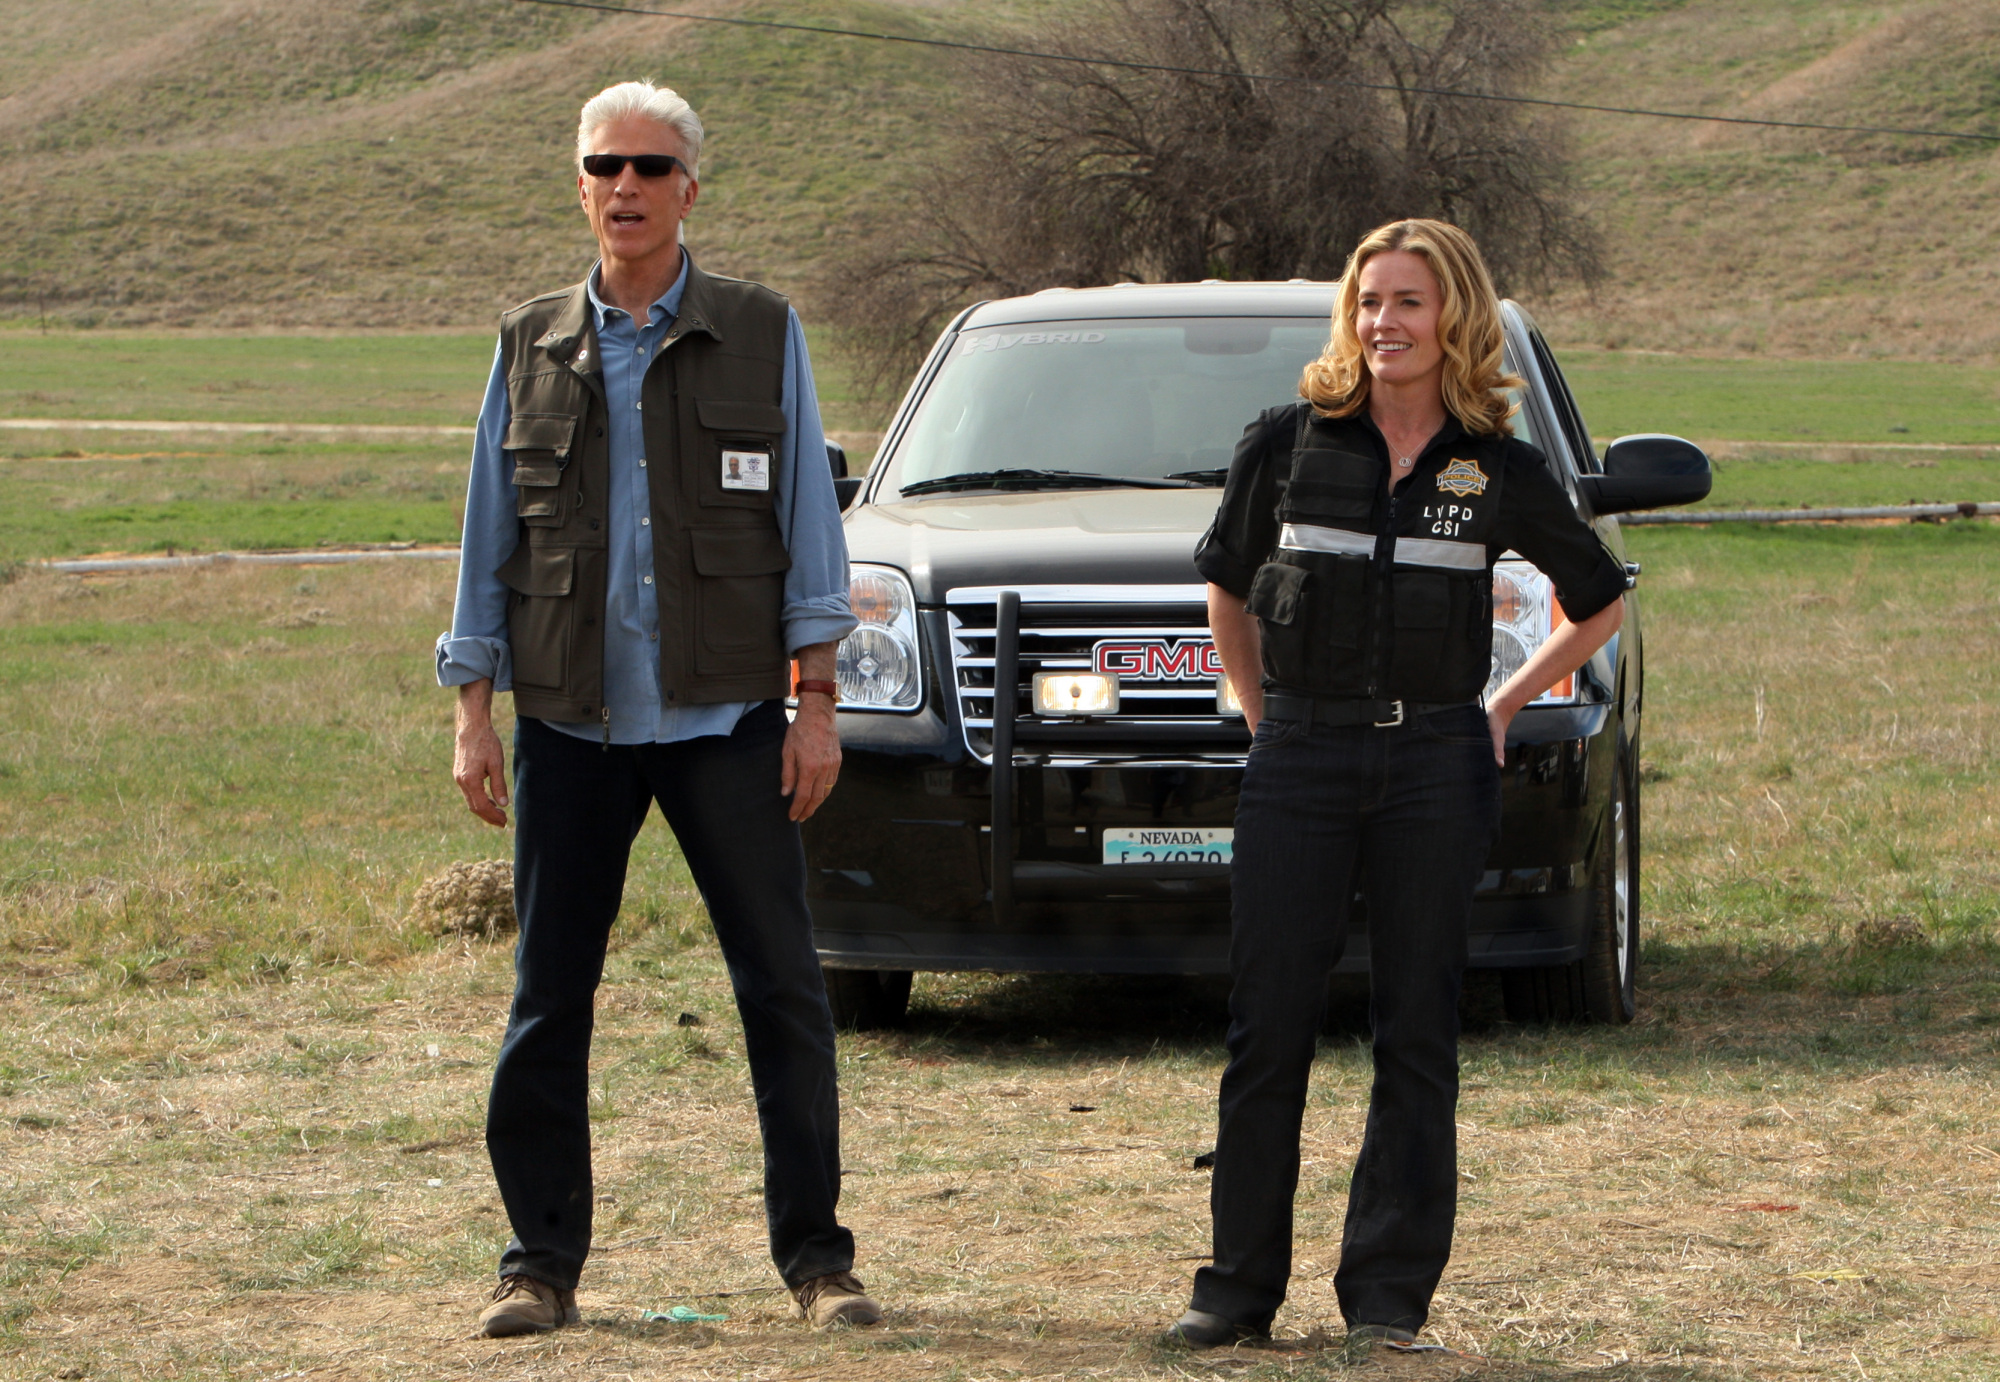 Highlights from the Fifteenth Episode of Season 12 of CSI.